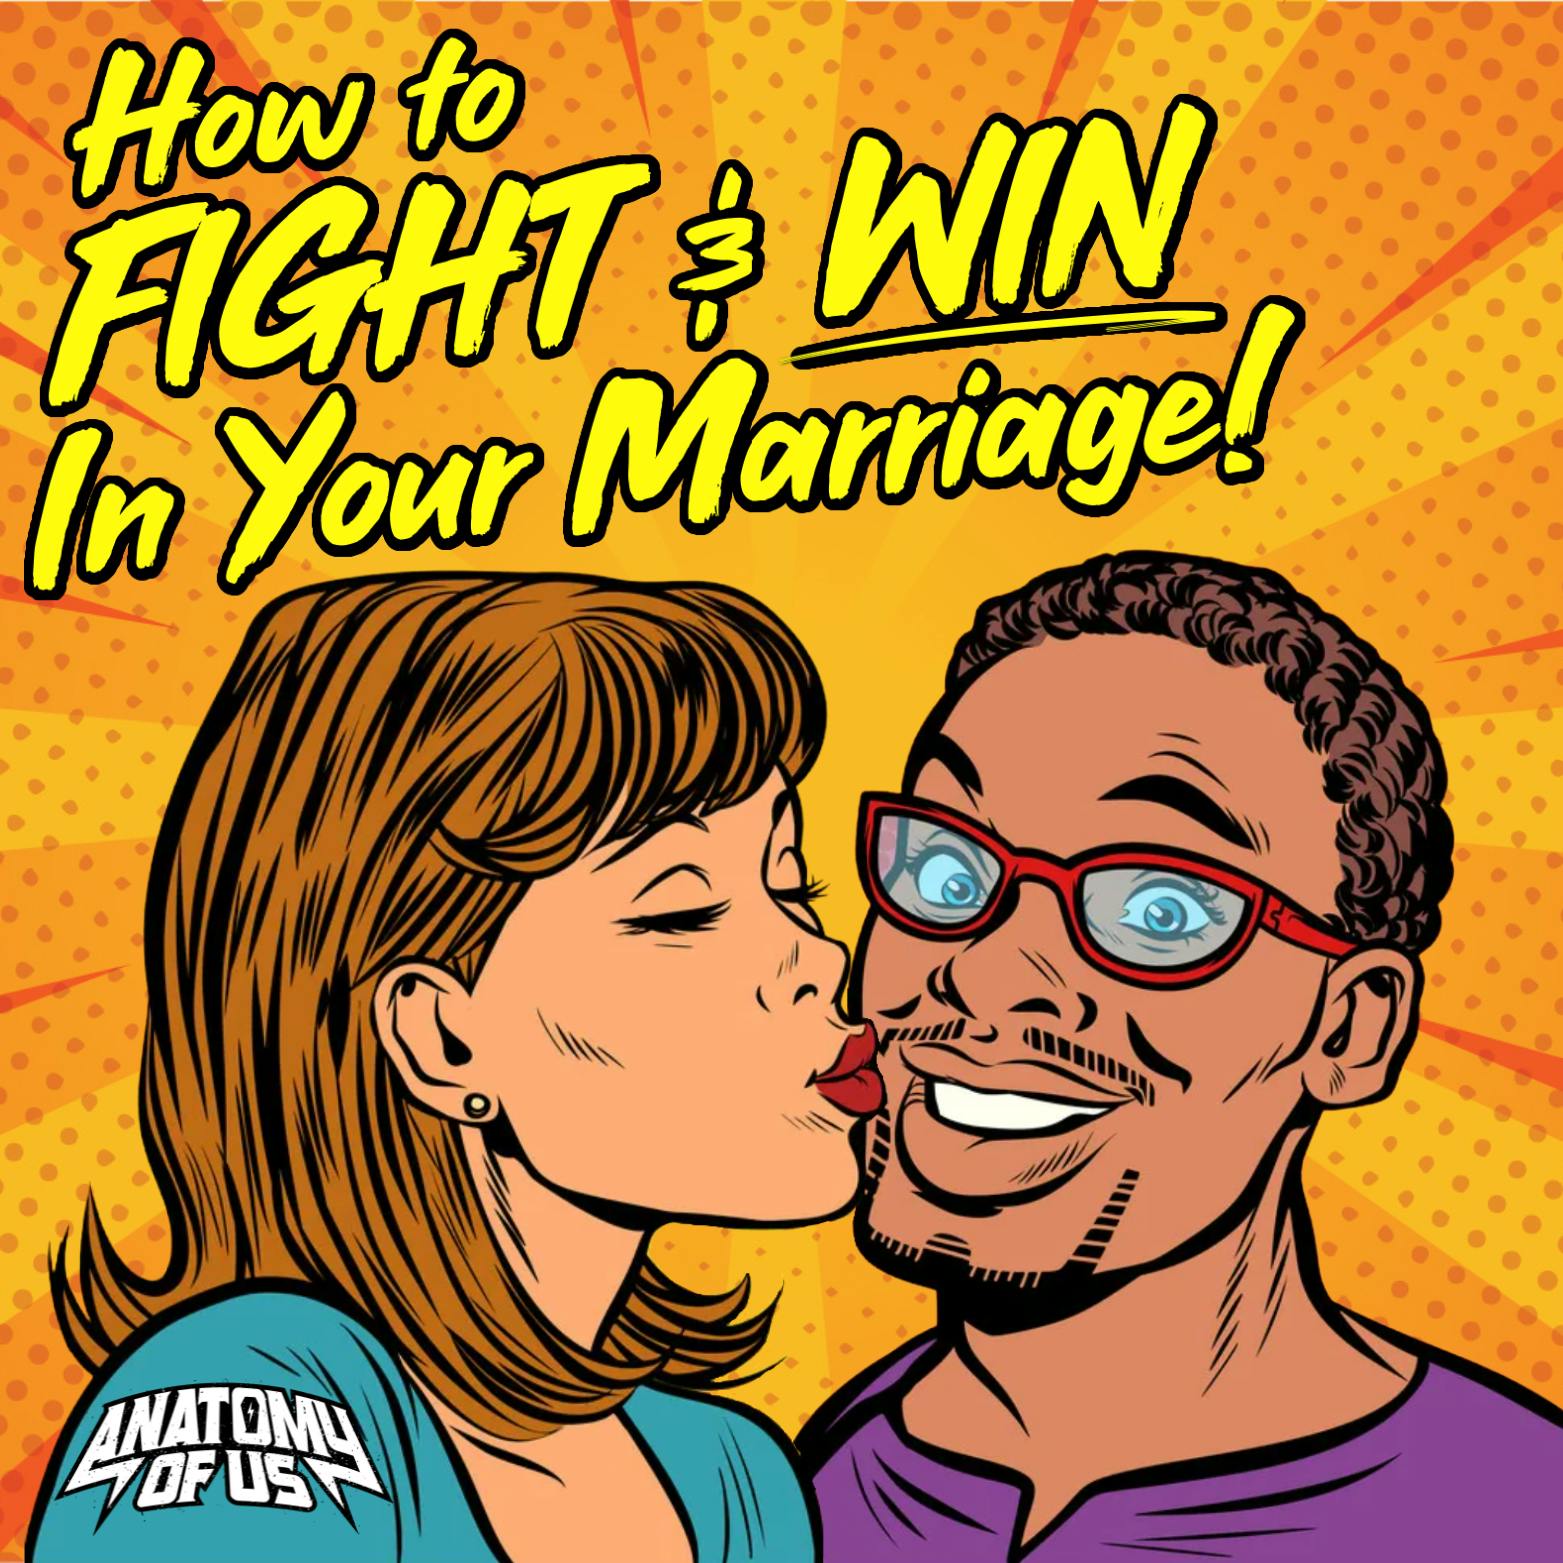 How to Fight and WIN in Your Marriage!